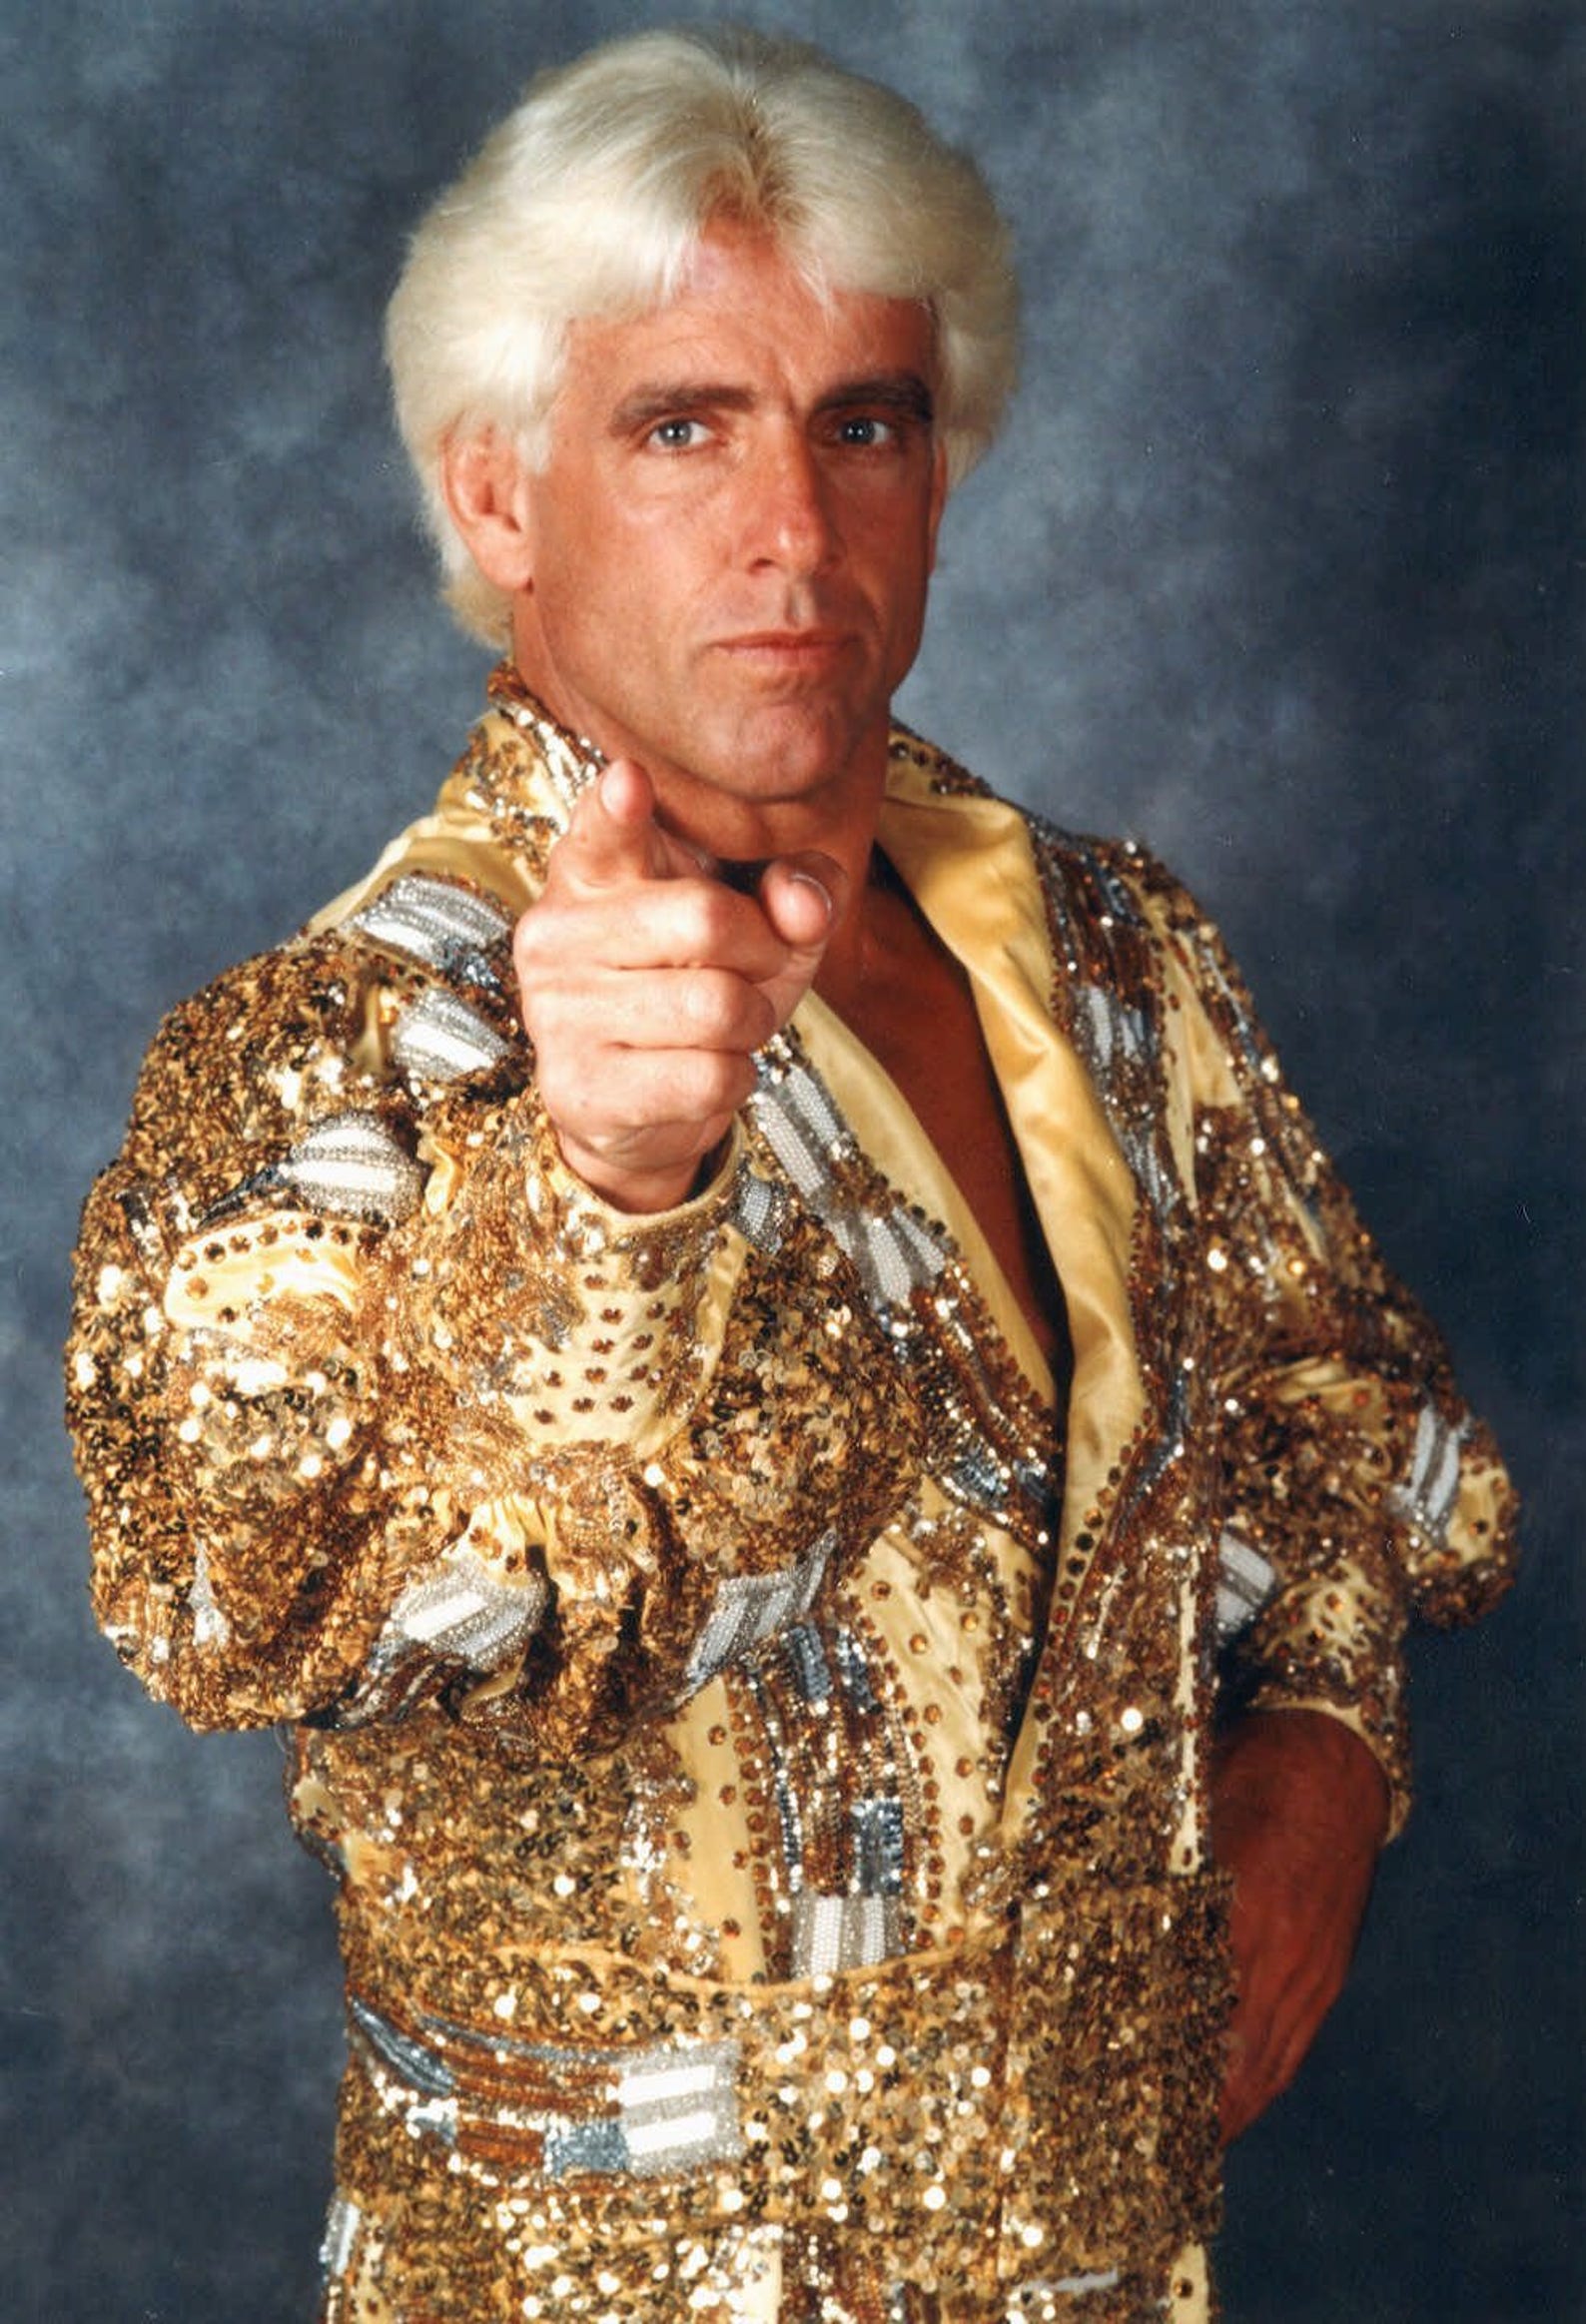 Ric Flair: The Nature